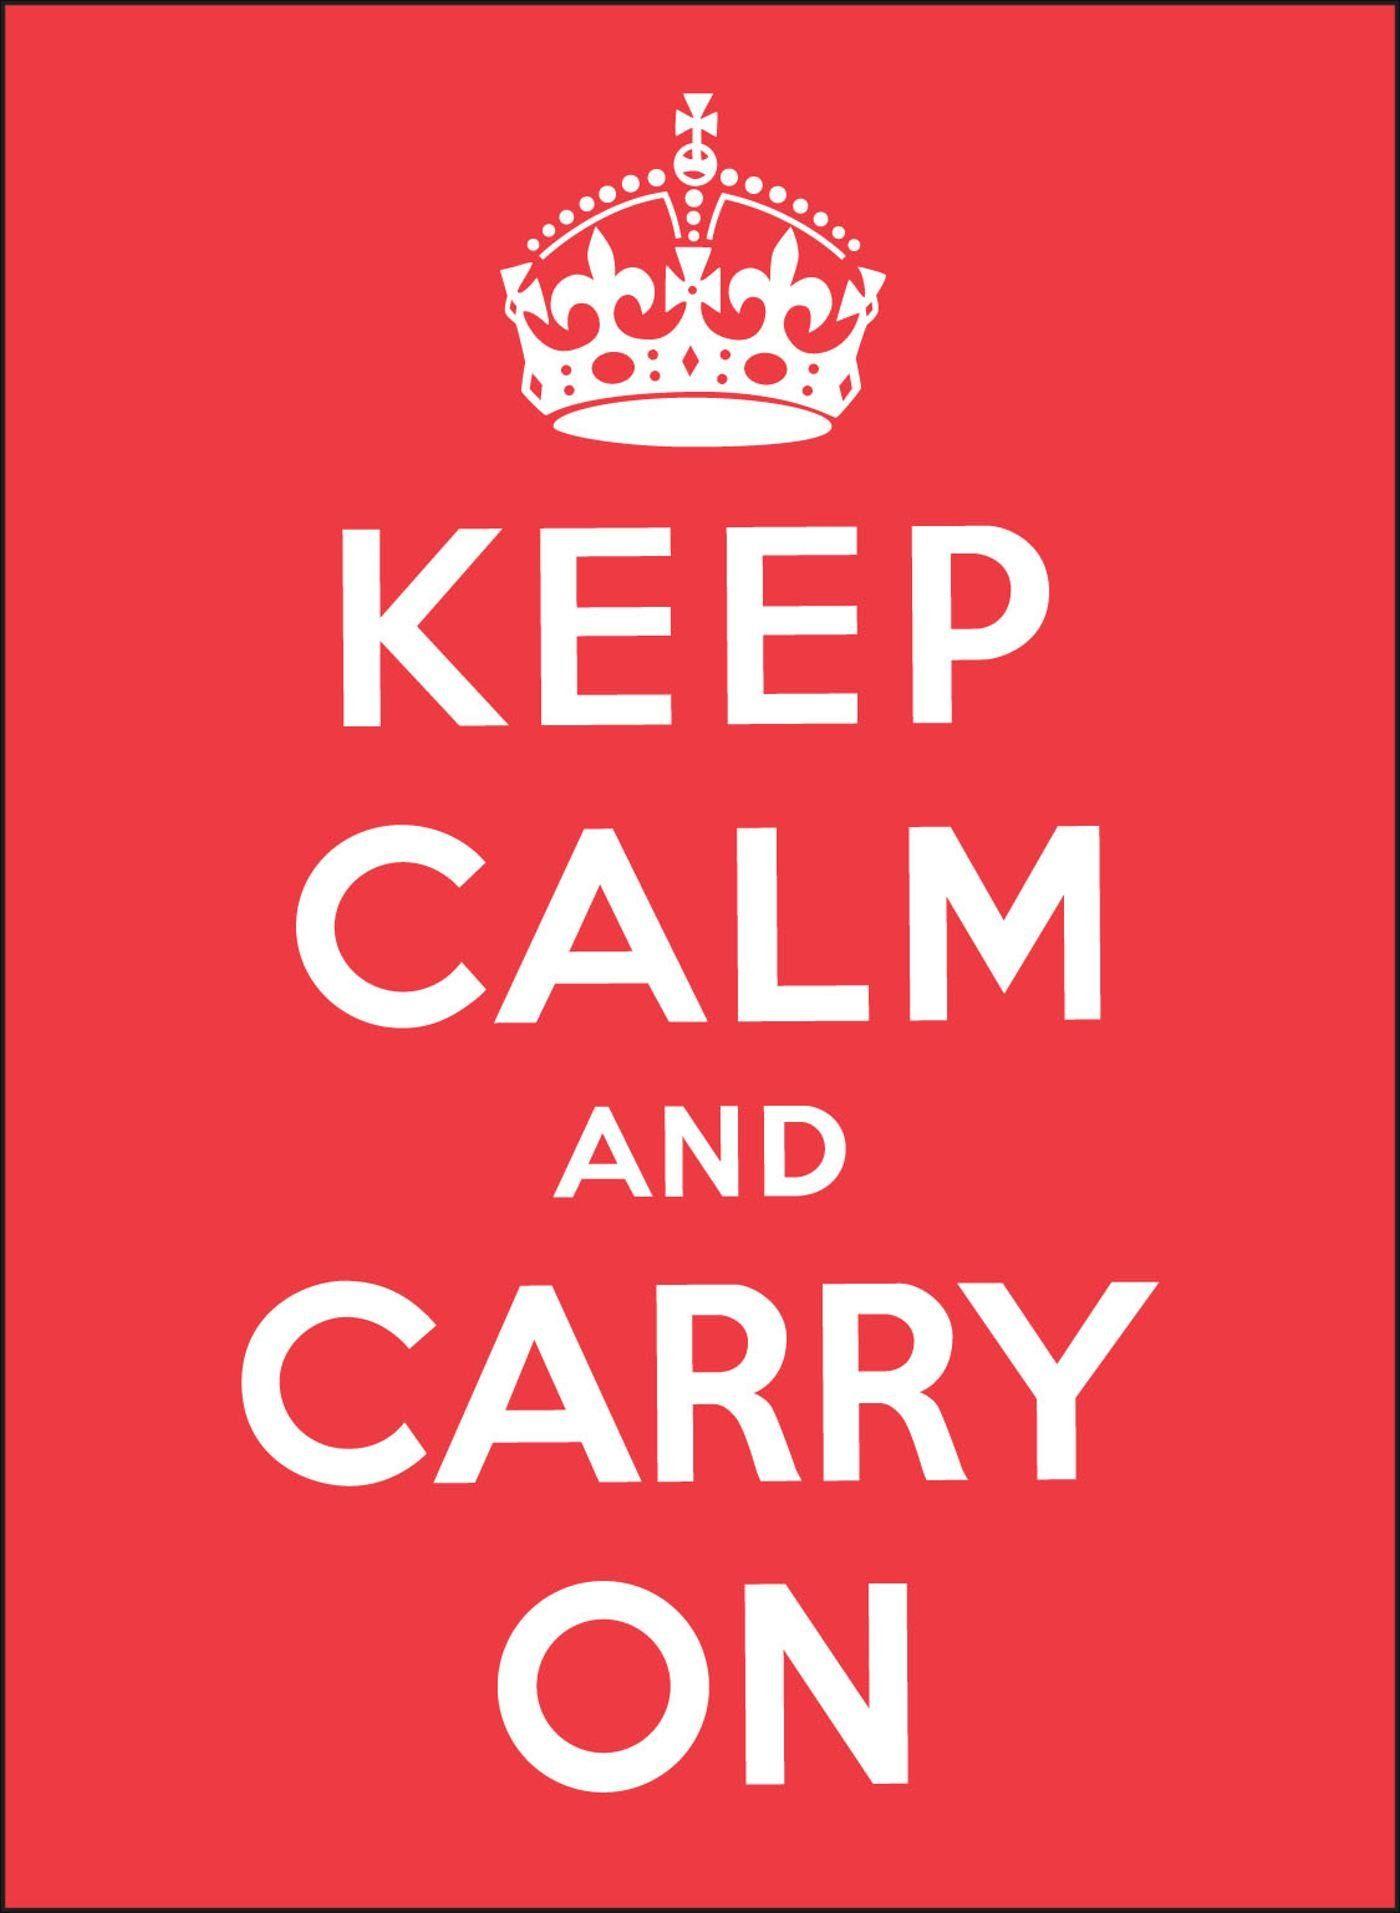 Keep Calm and Carry On: Andrews McMeel Publishing: 9780740793400